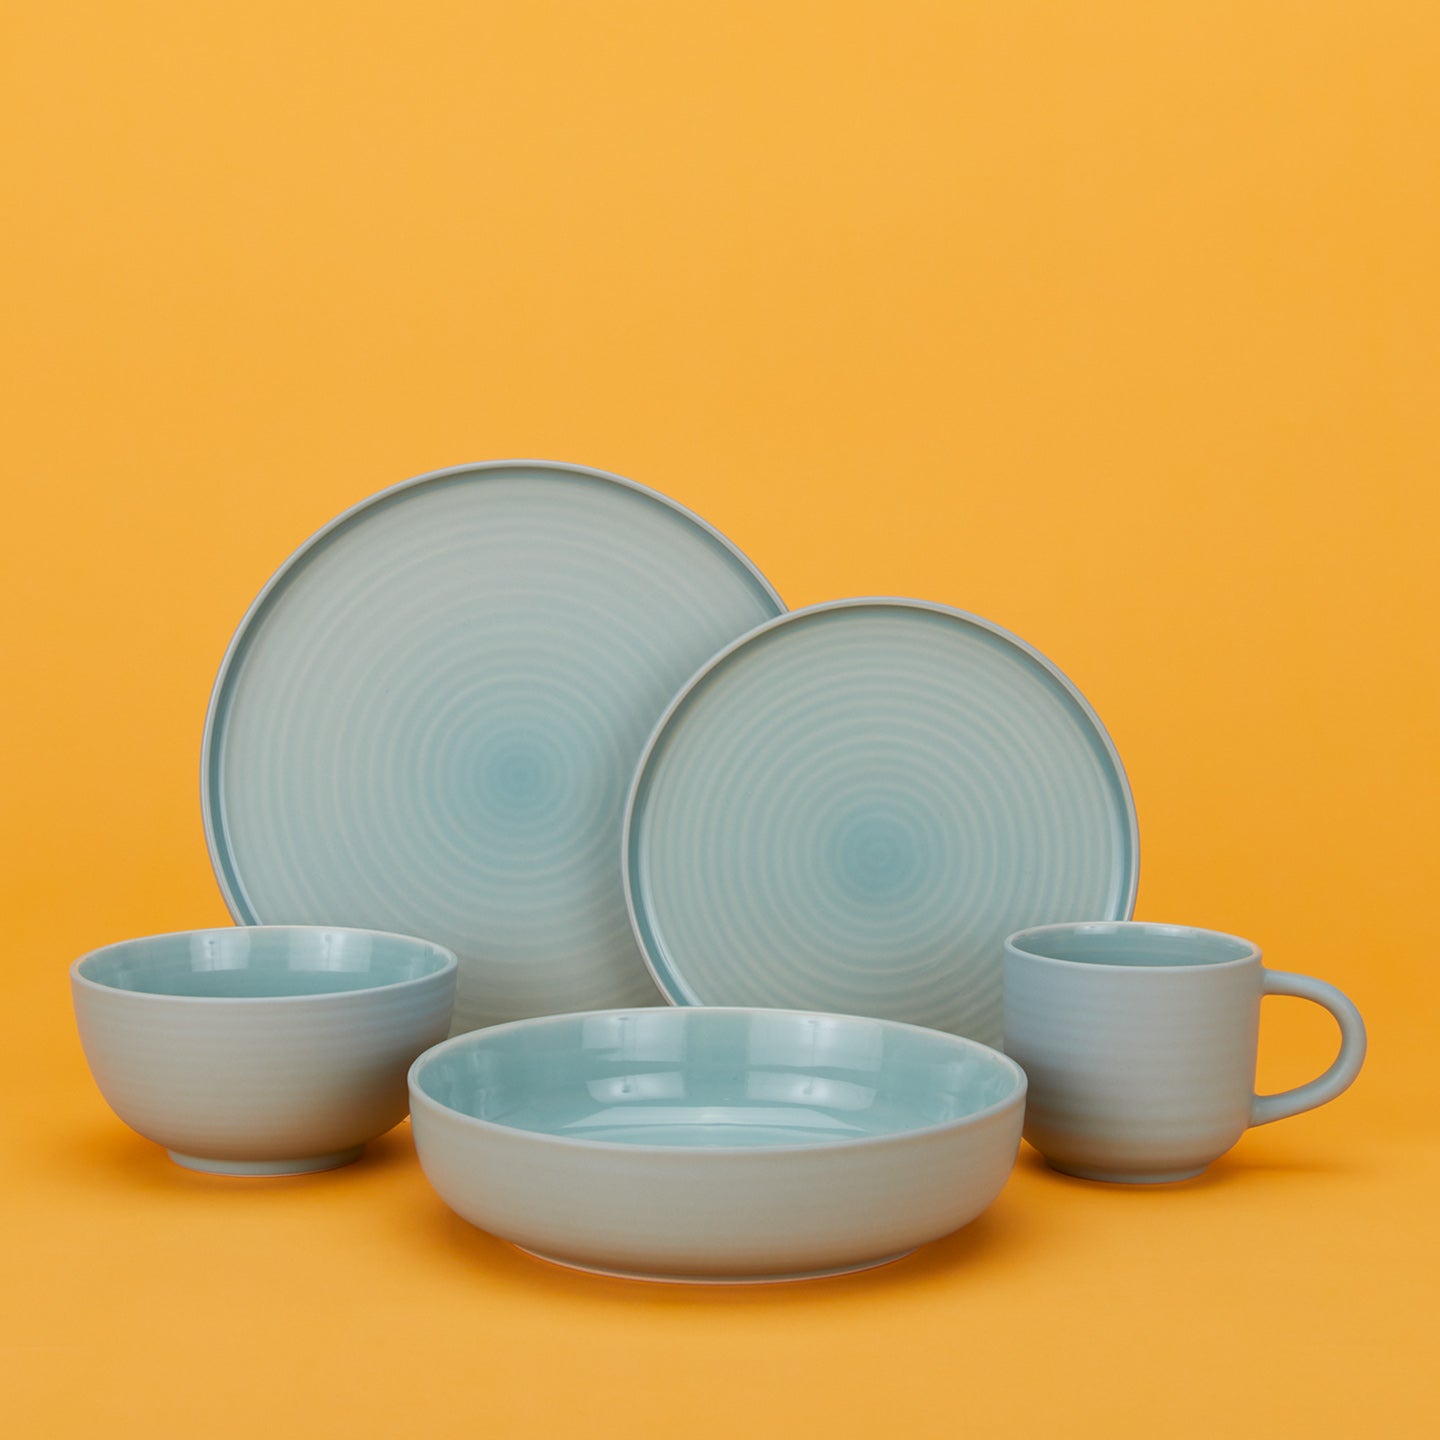 Group of Essential Dinnerware in Sky including low bowl, large bowl, salad plate, dinner plate and mug.